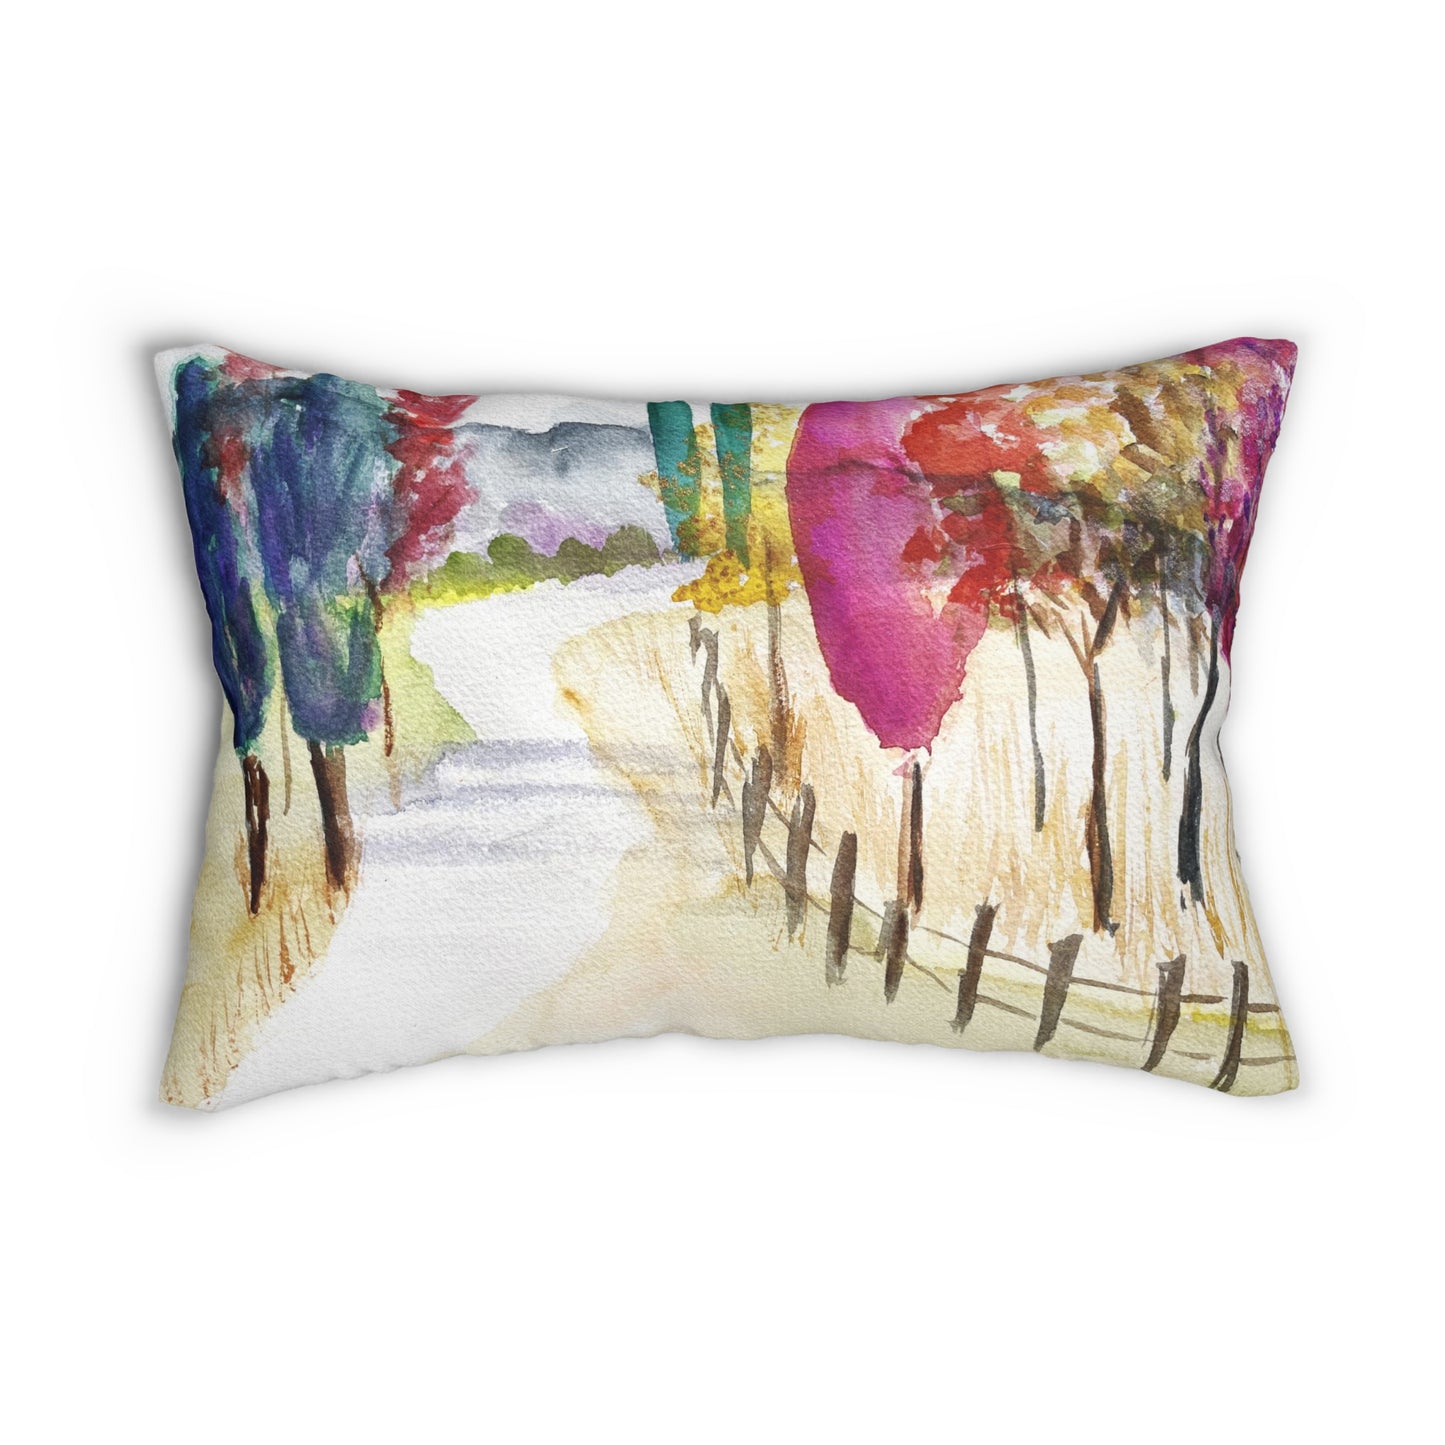 Coussin lombaire route sinueuse